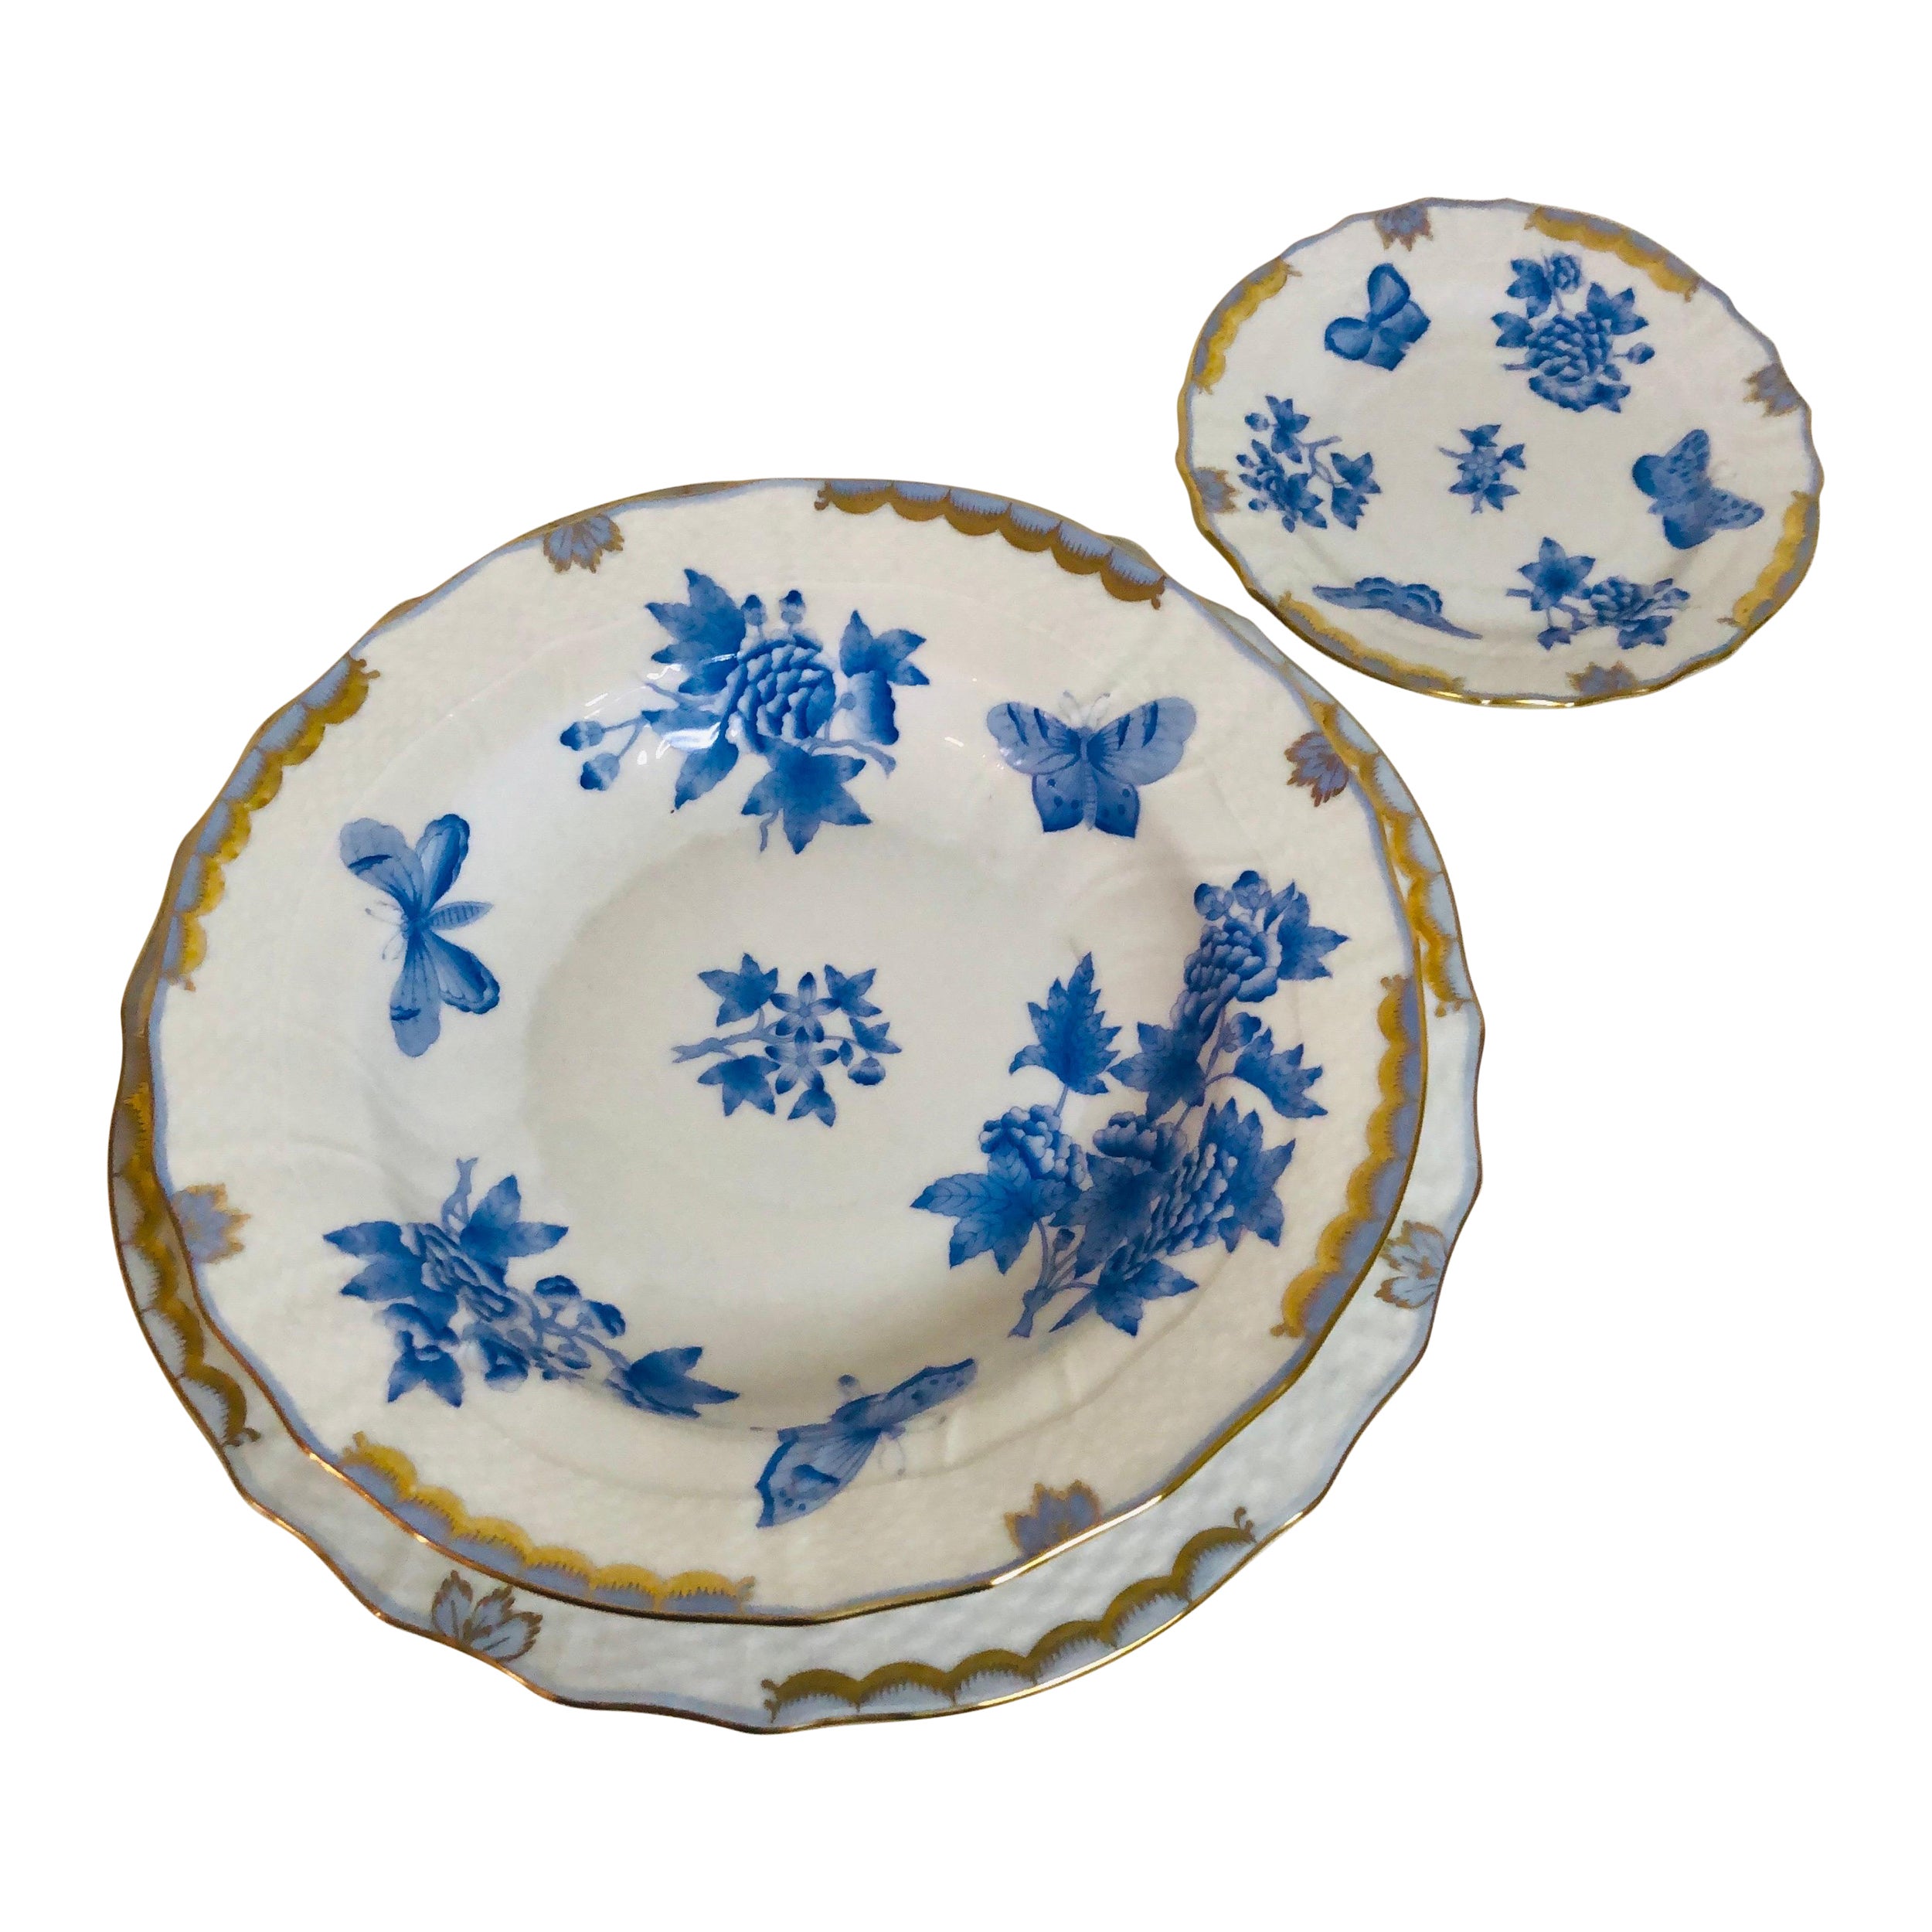 Extensive Herend Fortuna Dinner Service Painted with Butterflies and Flowers For Sale